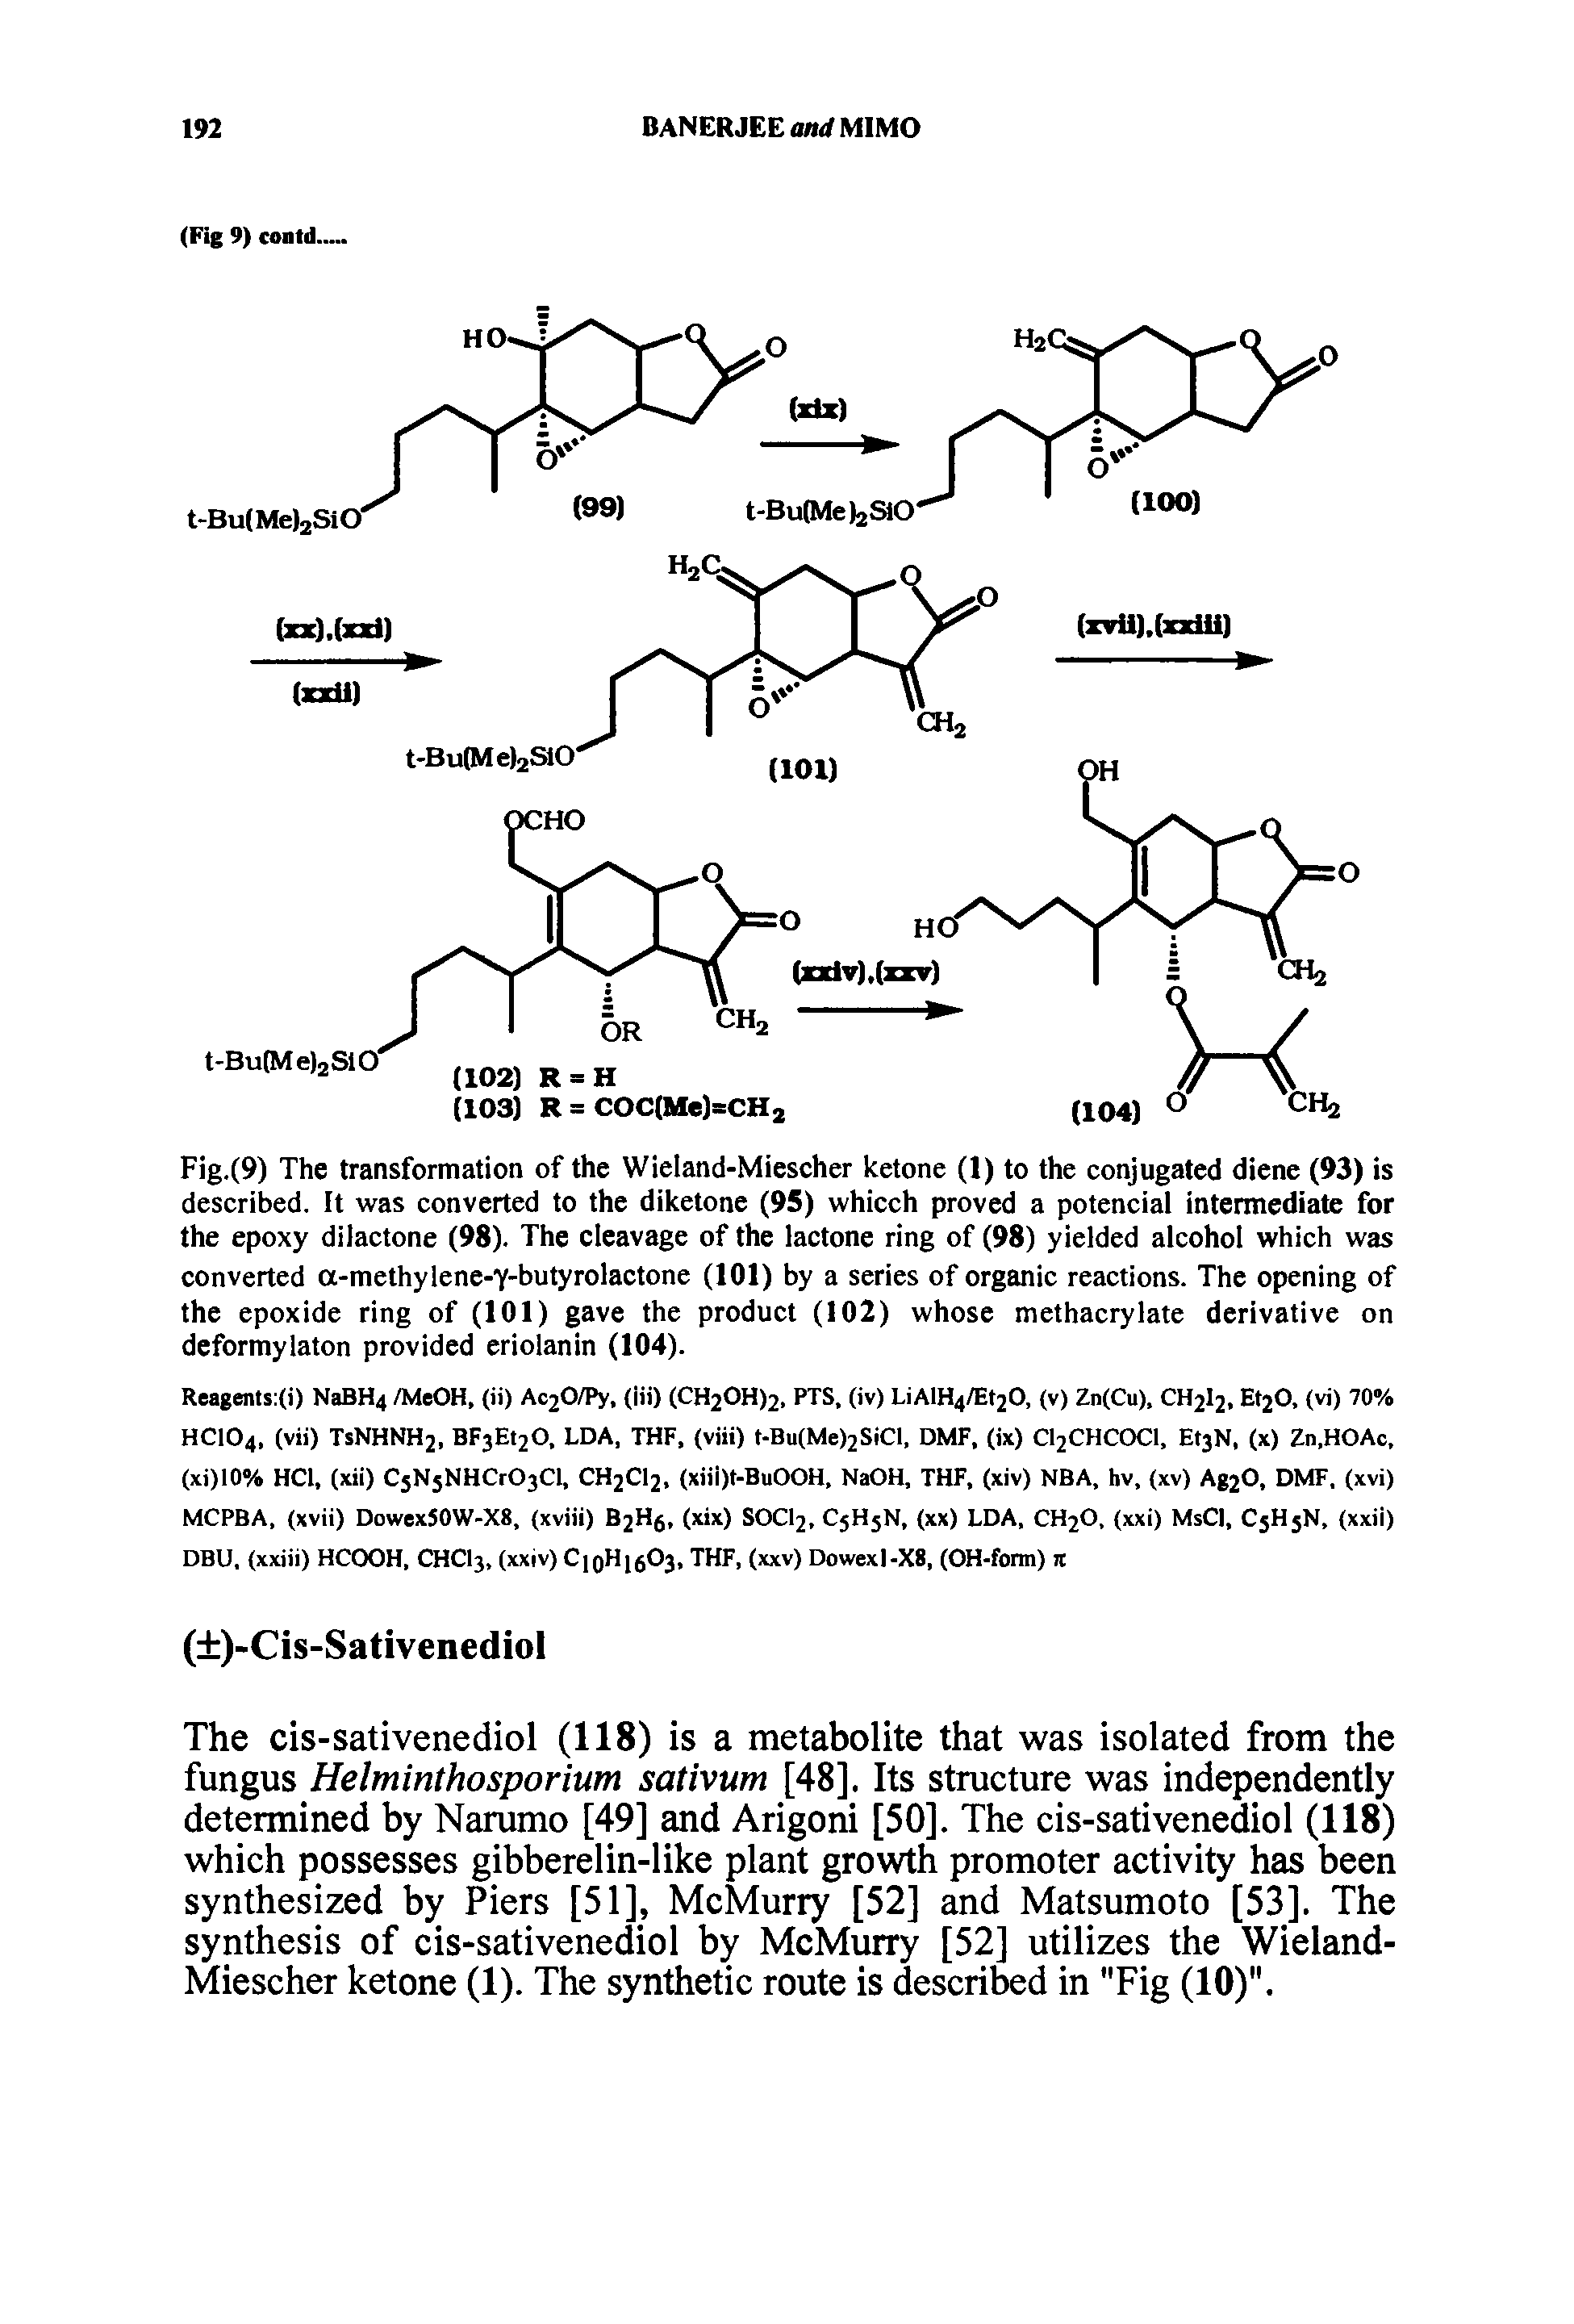 Fig.(9) The transformation of the Wieland-Miescher ketone (1) to the conjugated diene (93) is described. It was converted to the diketone (95) whicch proved a potencial intermediate for the epoxy dilactone (98). The cleavage of the lactone ring of (98) yielded alcohol which was converted a-methylene-Y-butyrolactone (101) by a series of organic reactions. The opening of the epoxide ring of (101) gave the product (102) whose methacrylate derivative on deformylaton provided eriolanin (104).